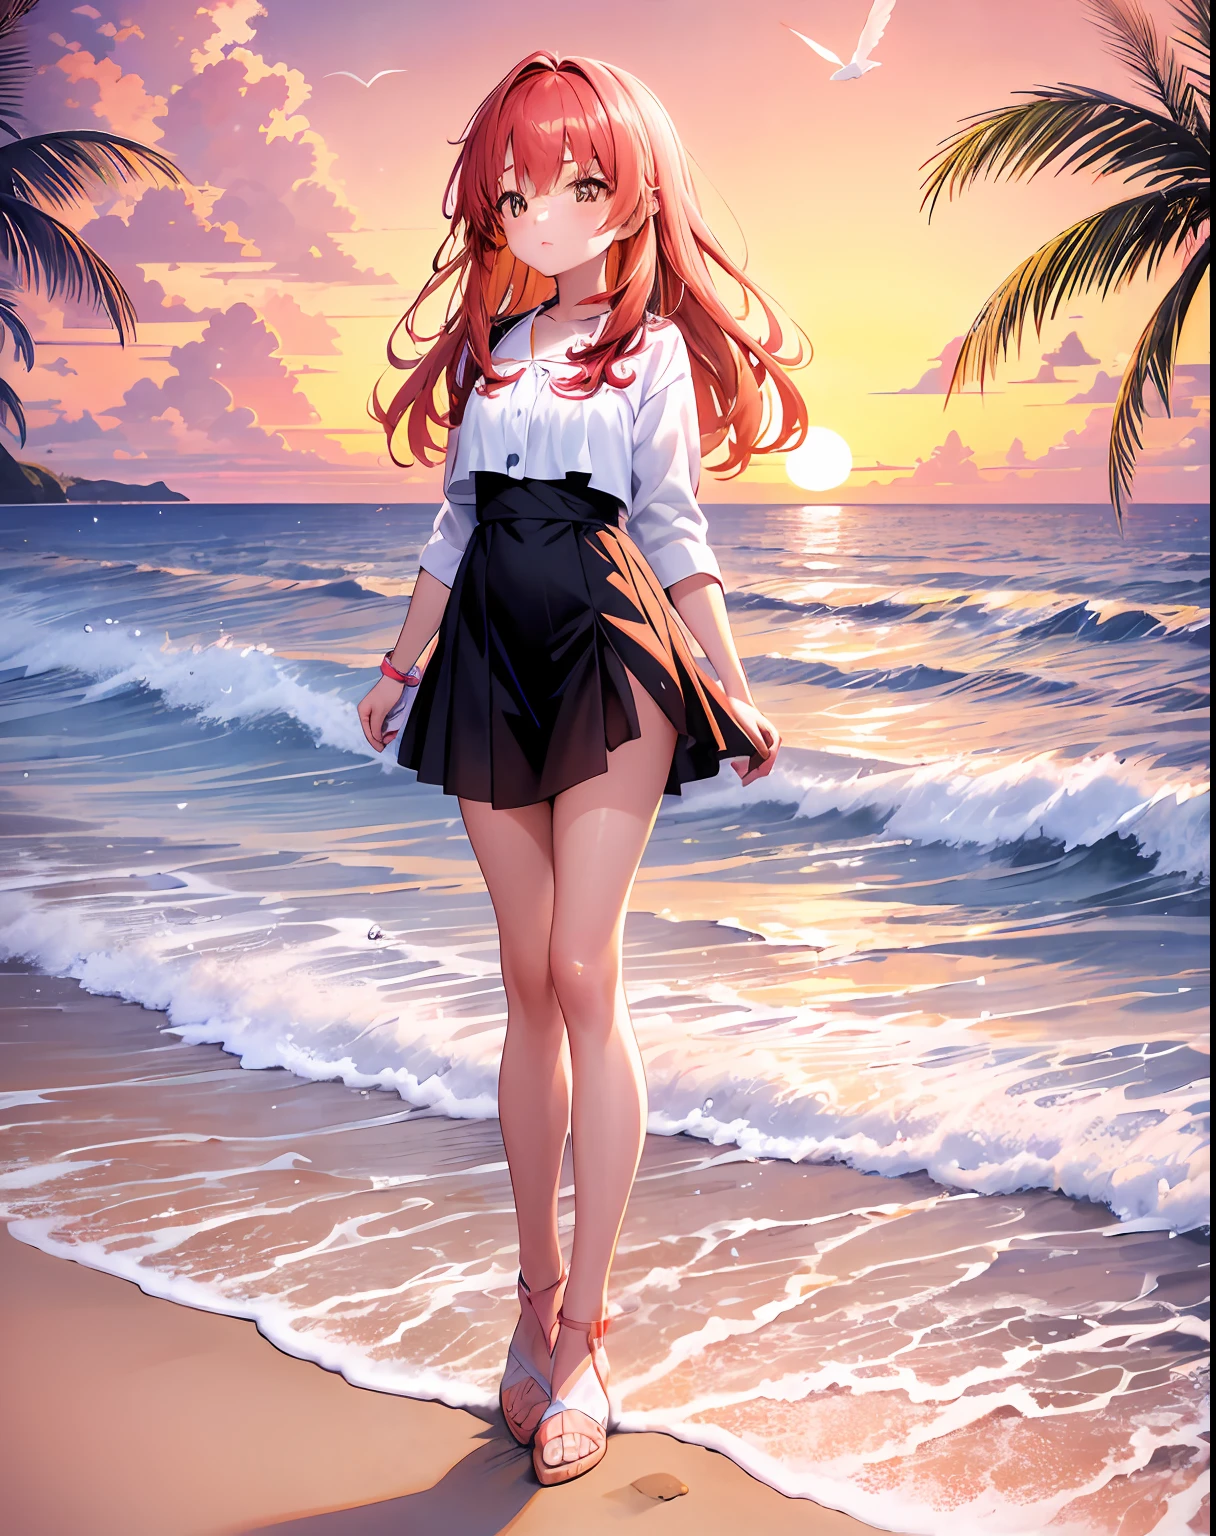 An absolutely mesmerizing sunset on the beach, with a mix of orange, pink, and yellow in the sky. The water is crystal clear, gently kisses the coast, and the white sand is endless. The scene is dynamic and breathtaking, with seagulls soaring high in the sky and palm trees swaying softly. Immerse yourself in the calm atmosphere and let the serenity surround you.